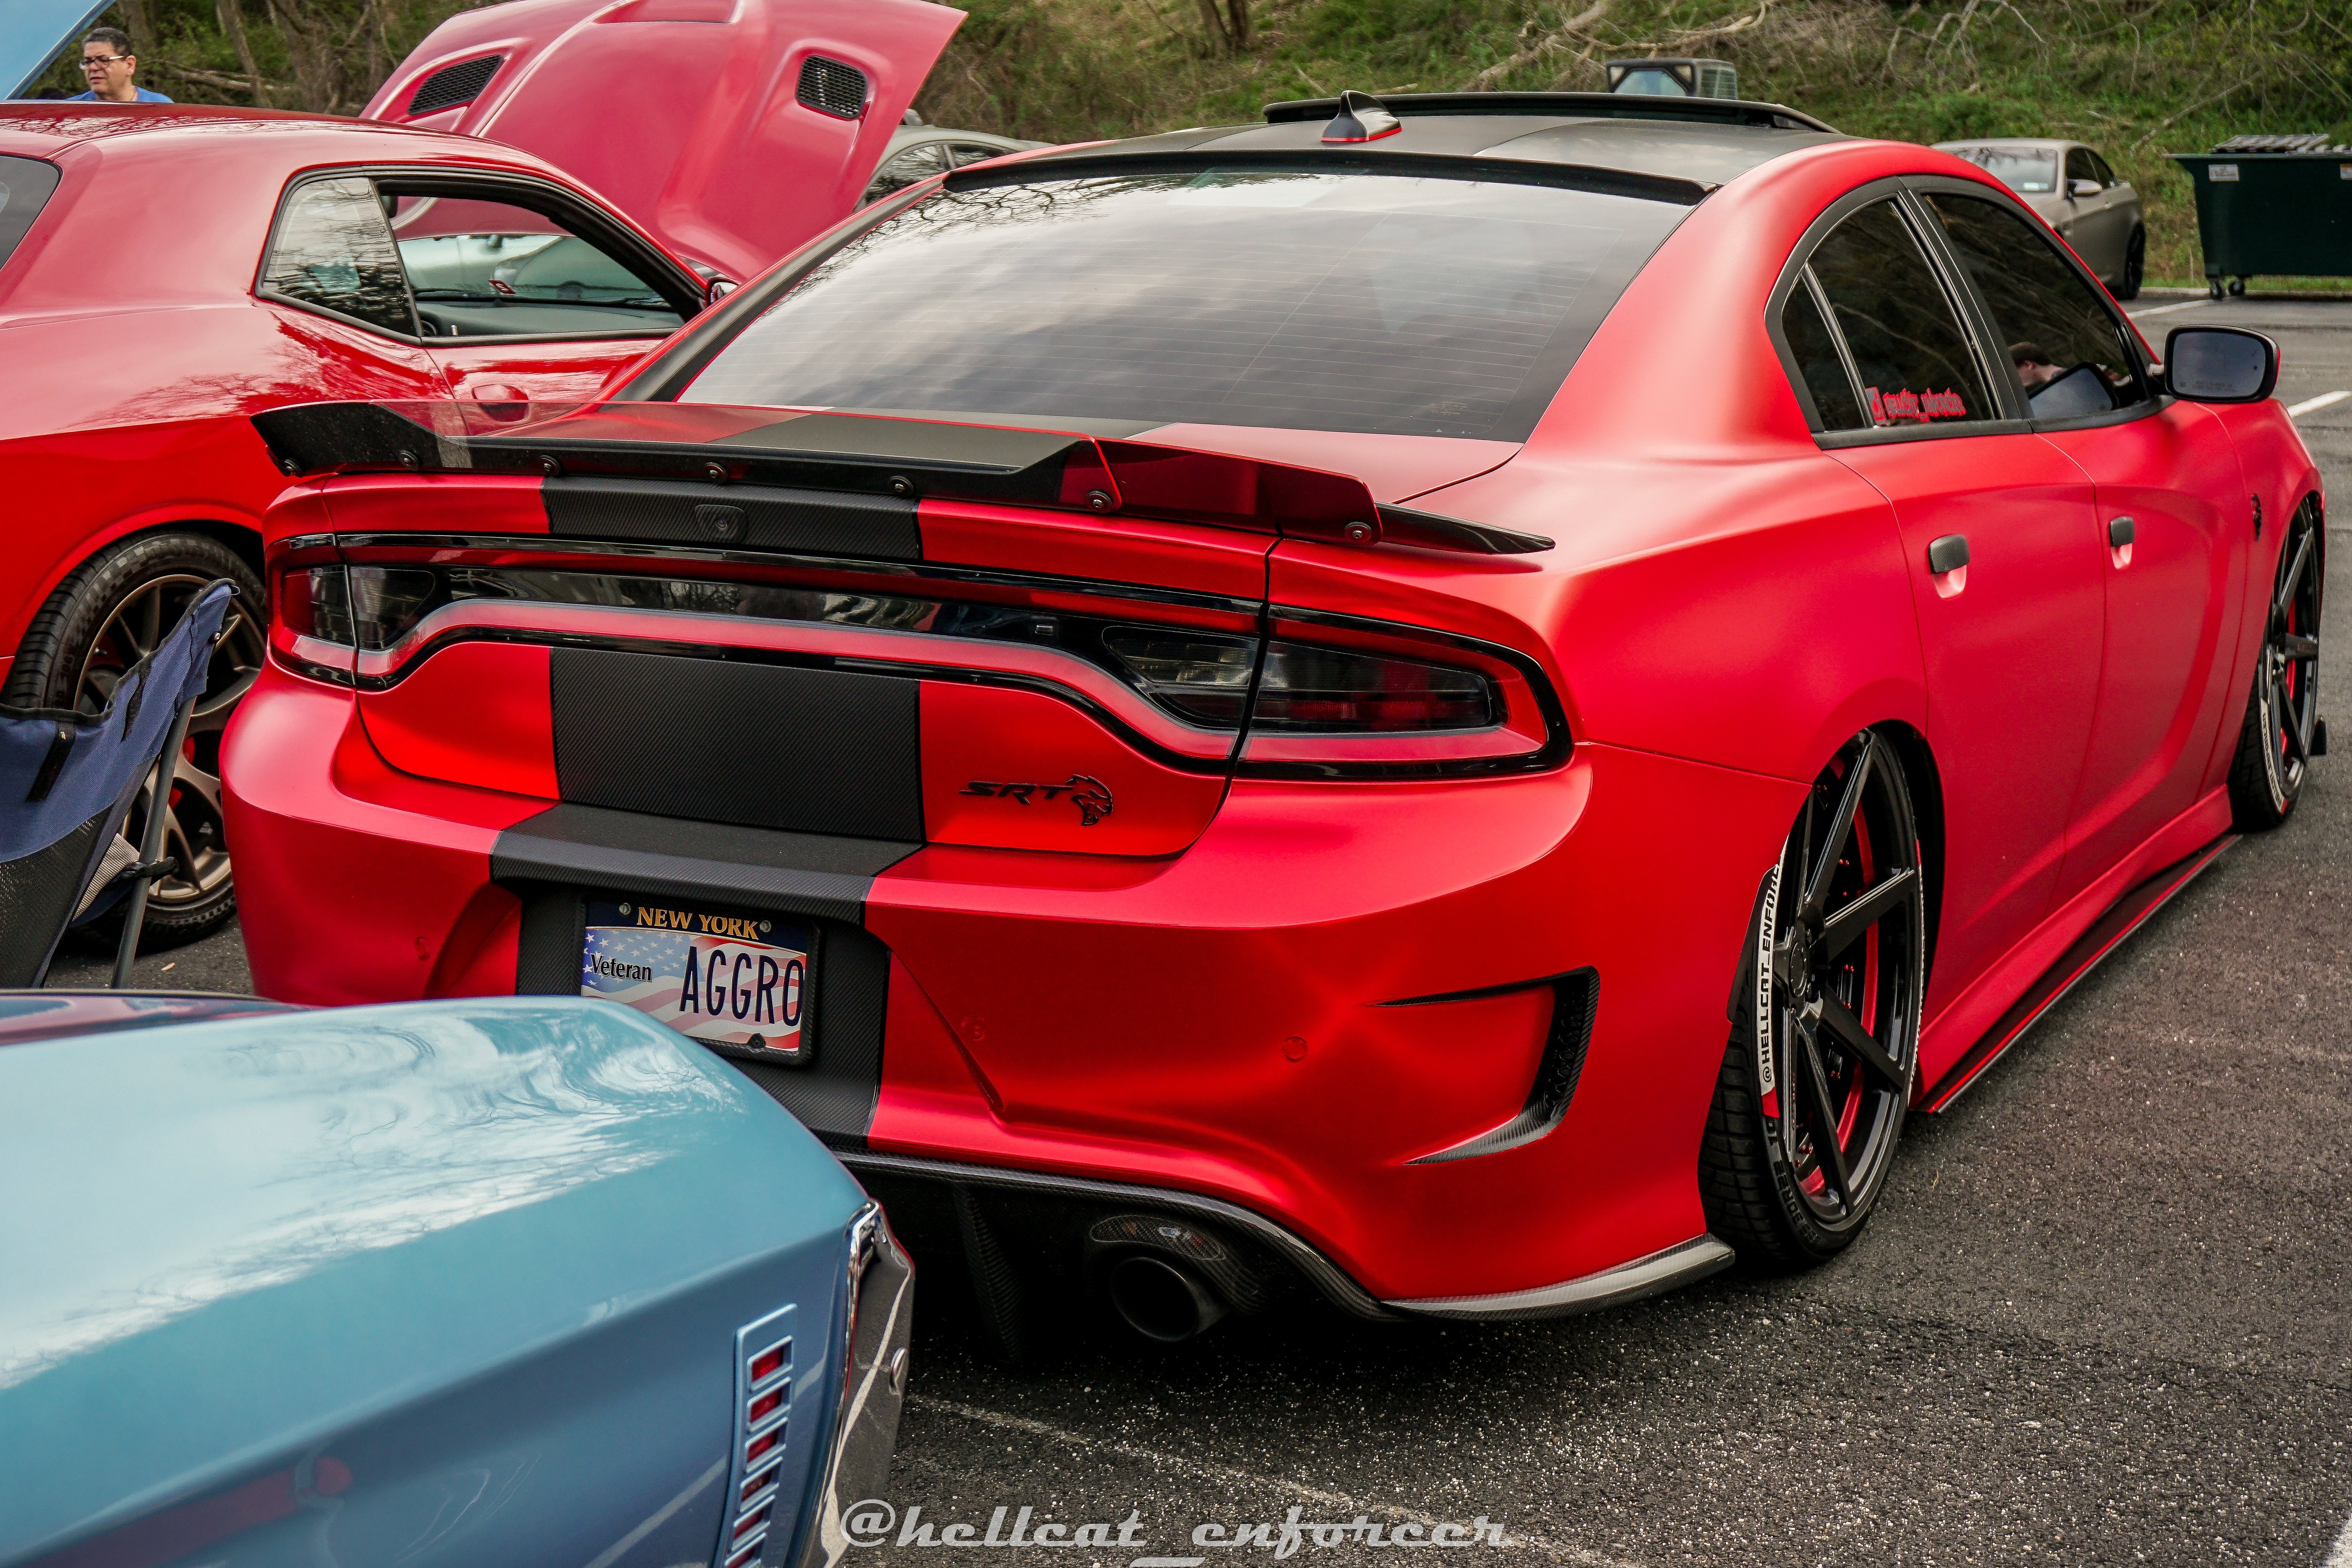 Custom Red Dodge Charger SRT Rear Bumper - Photo by @hellcat_enforcer